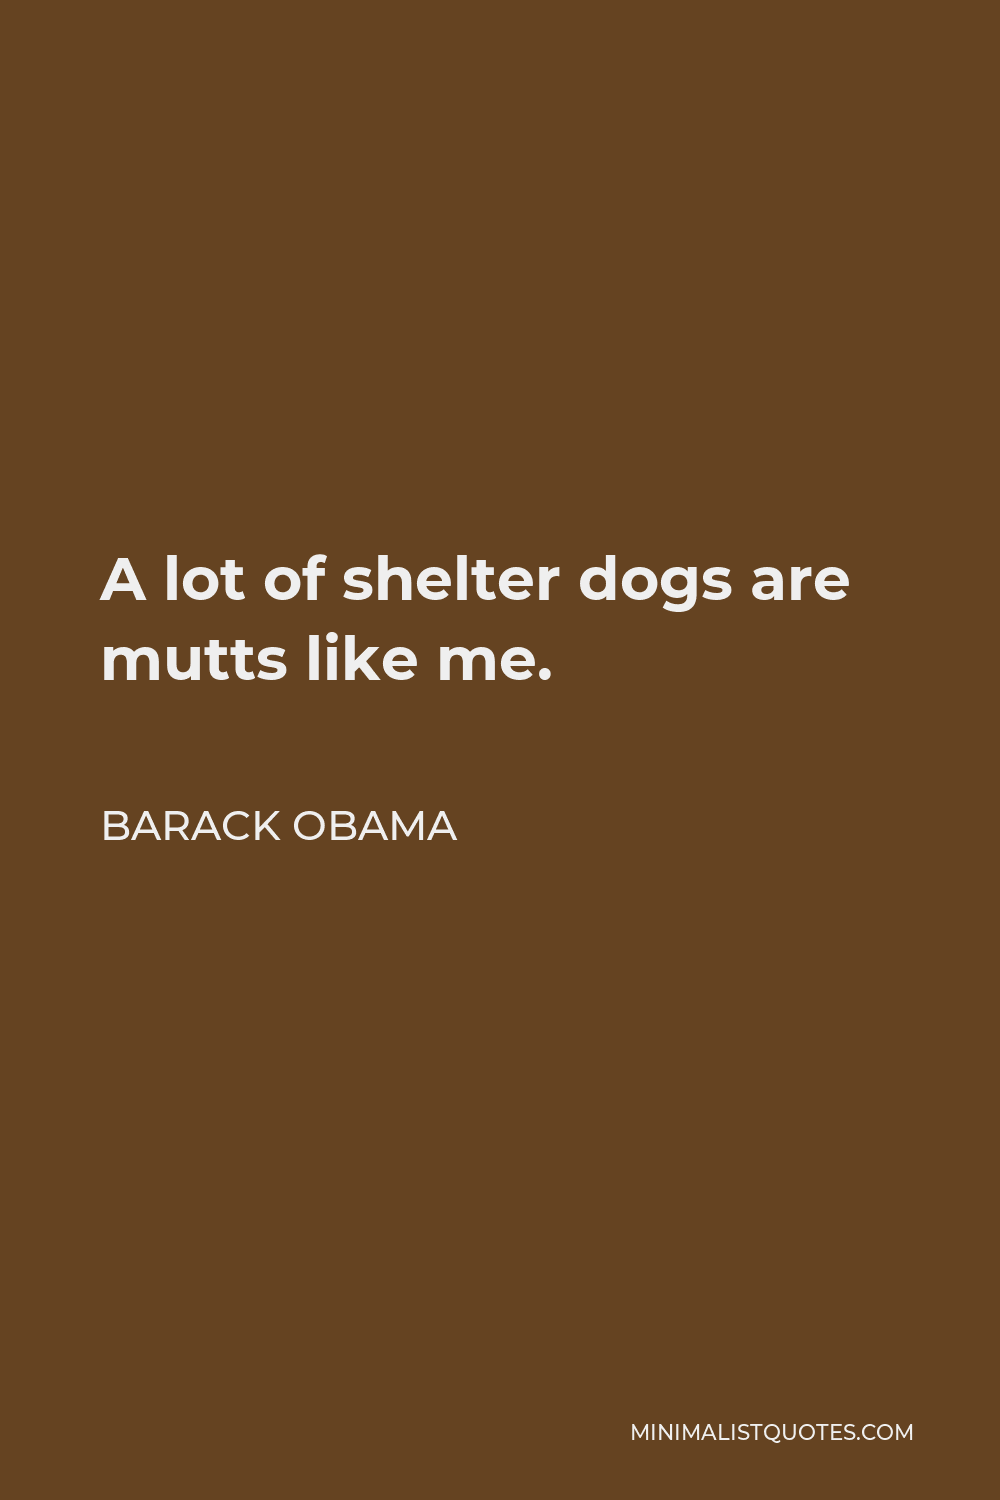 Barack Obama Quote - A lot of shelter dogs are mutts like me.